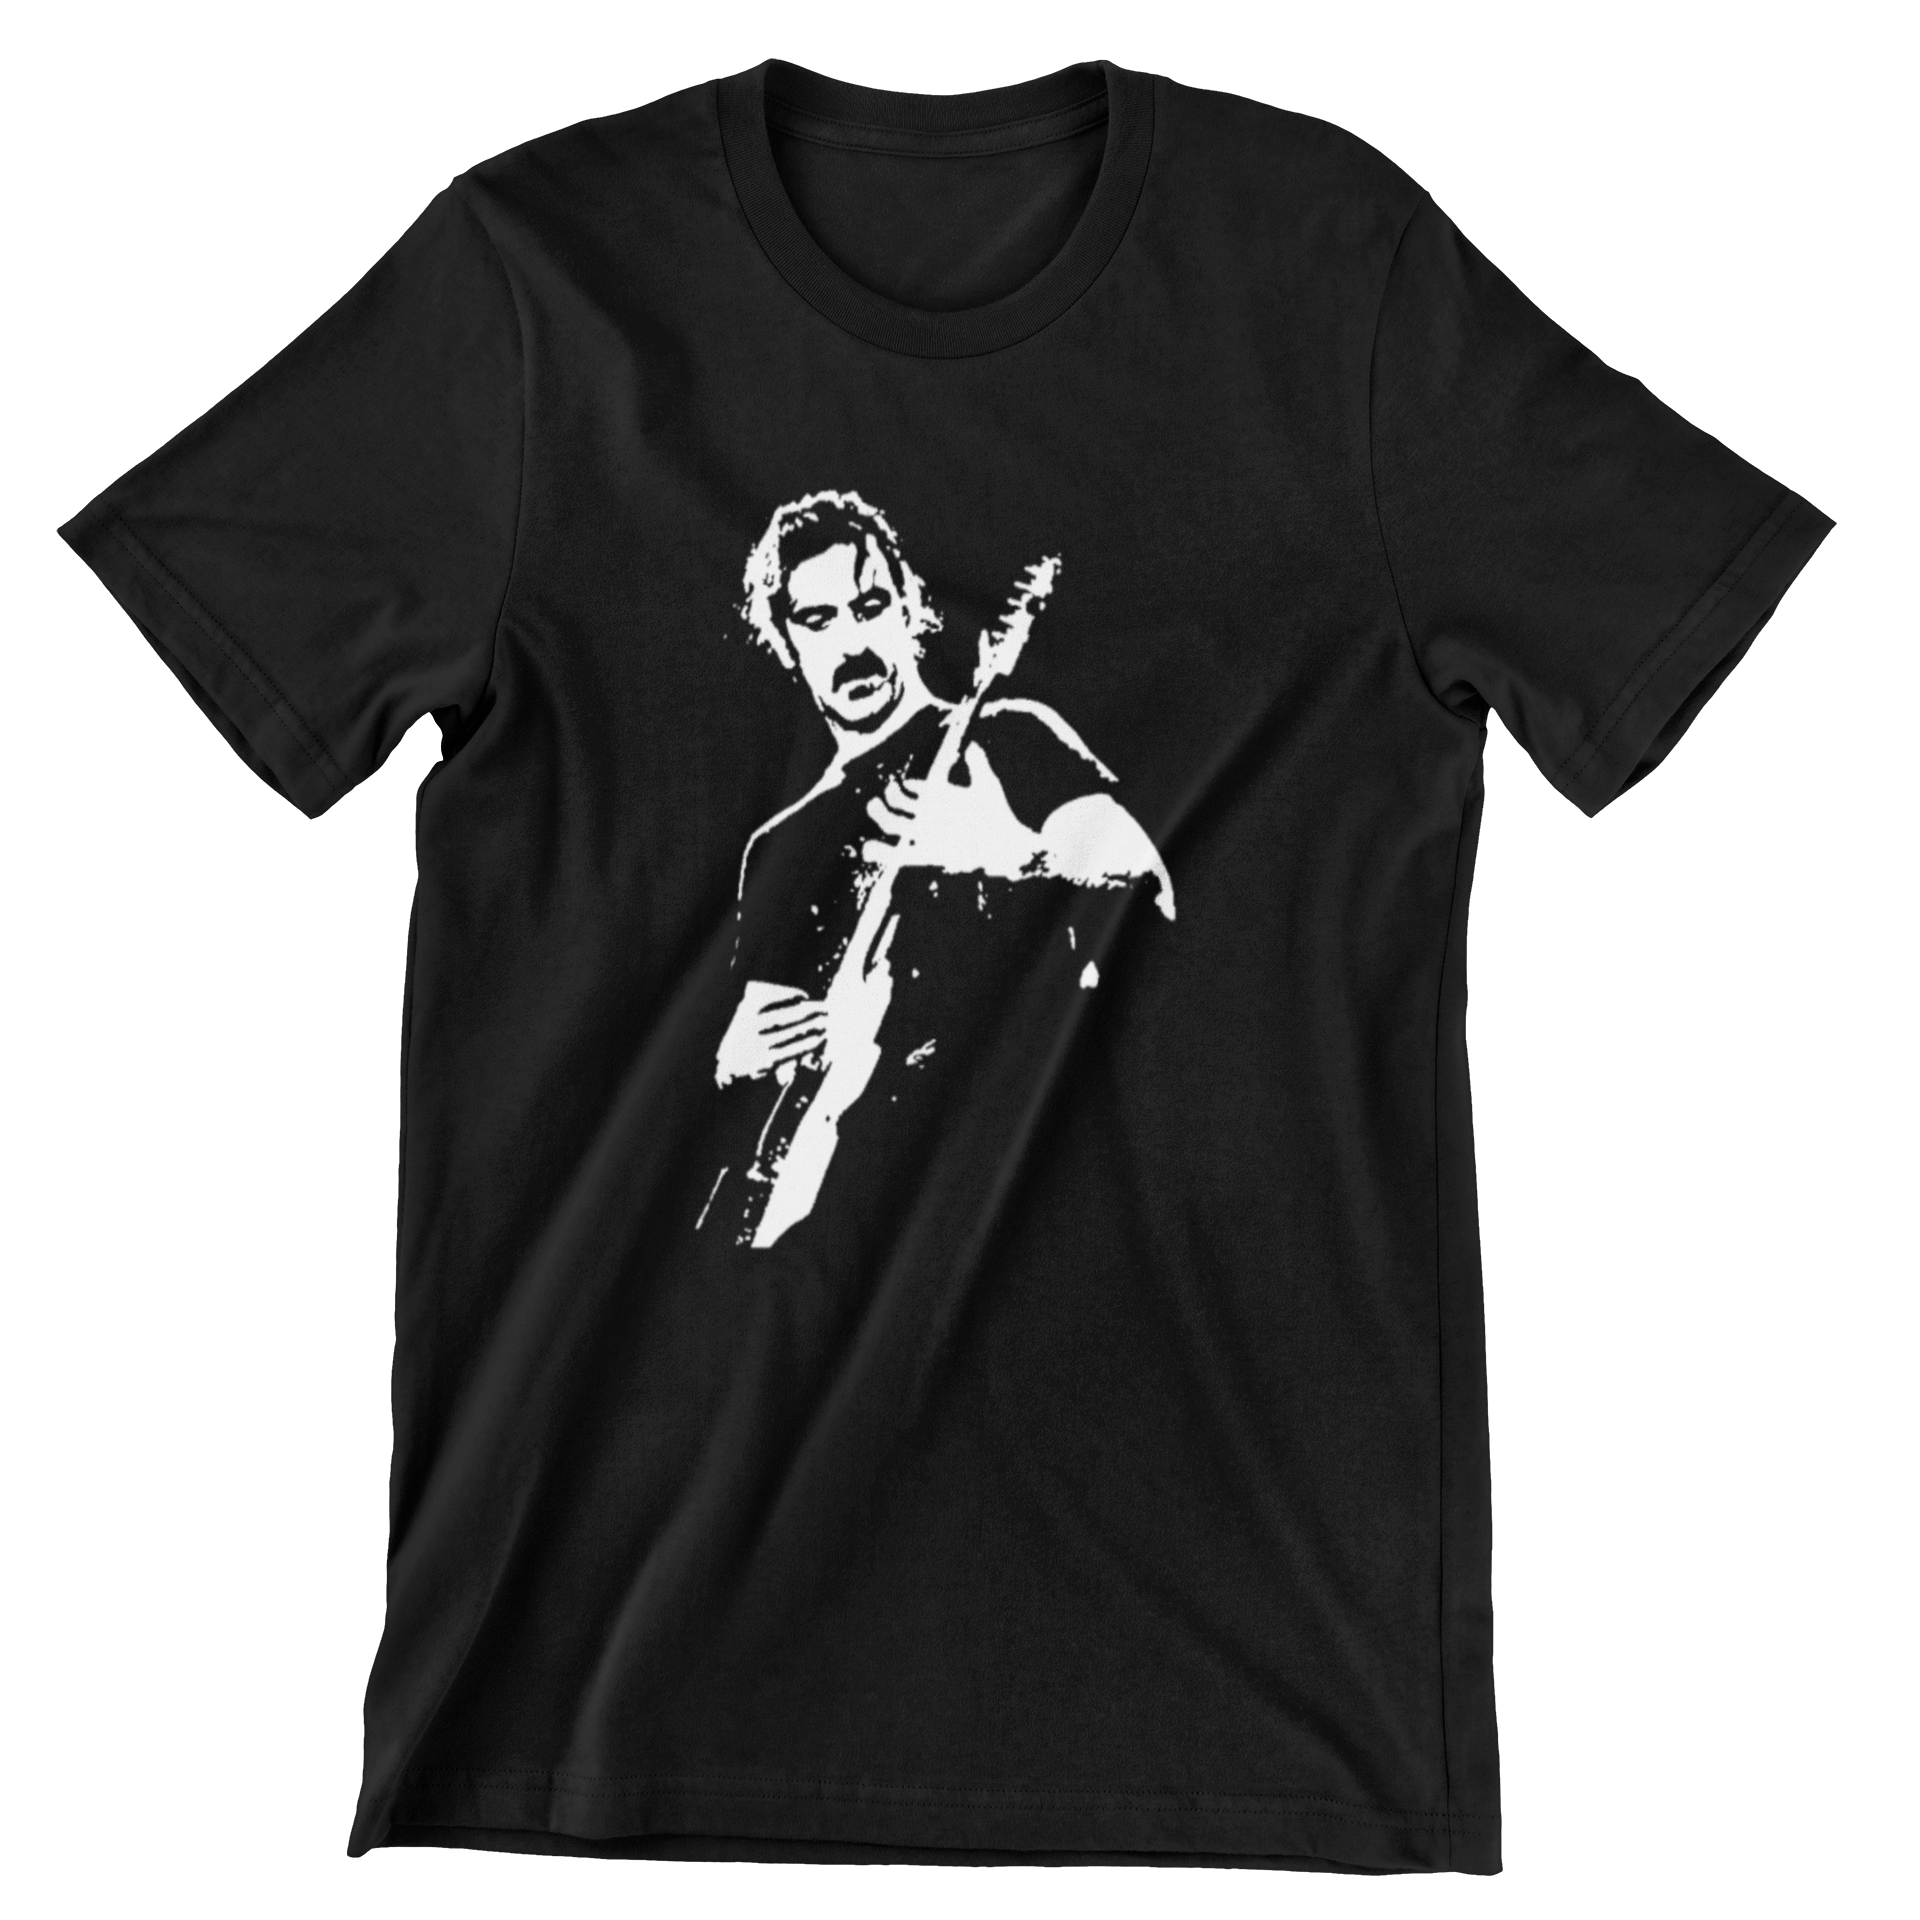 Frank Zappa T Shirt Mothers of Invention T-Shirts rockviewtees.com